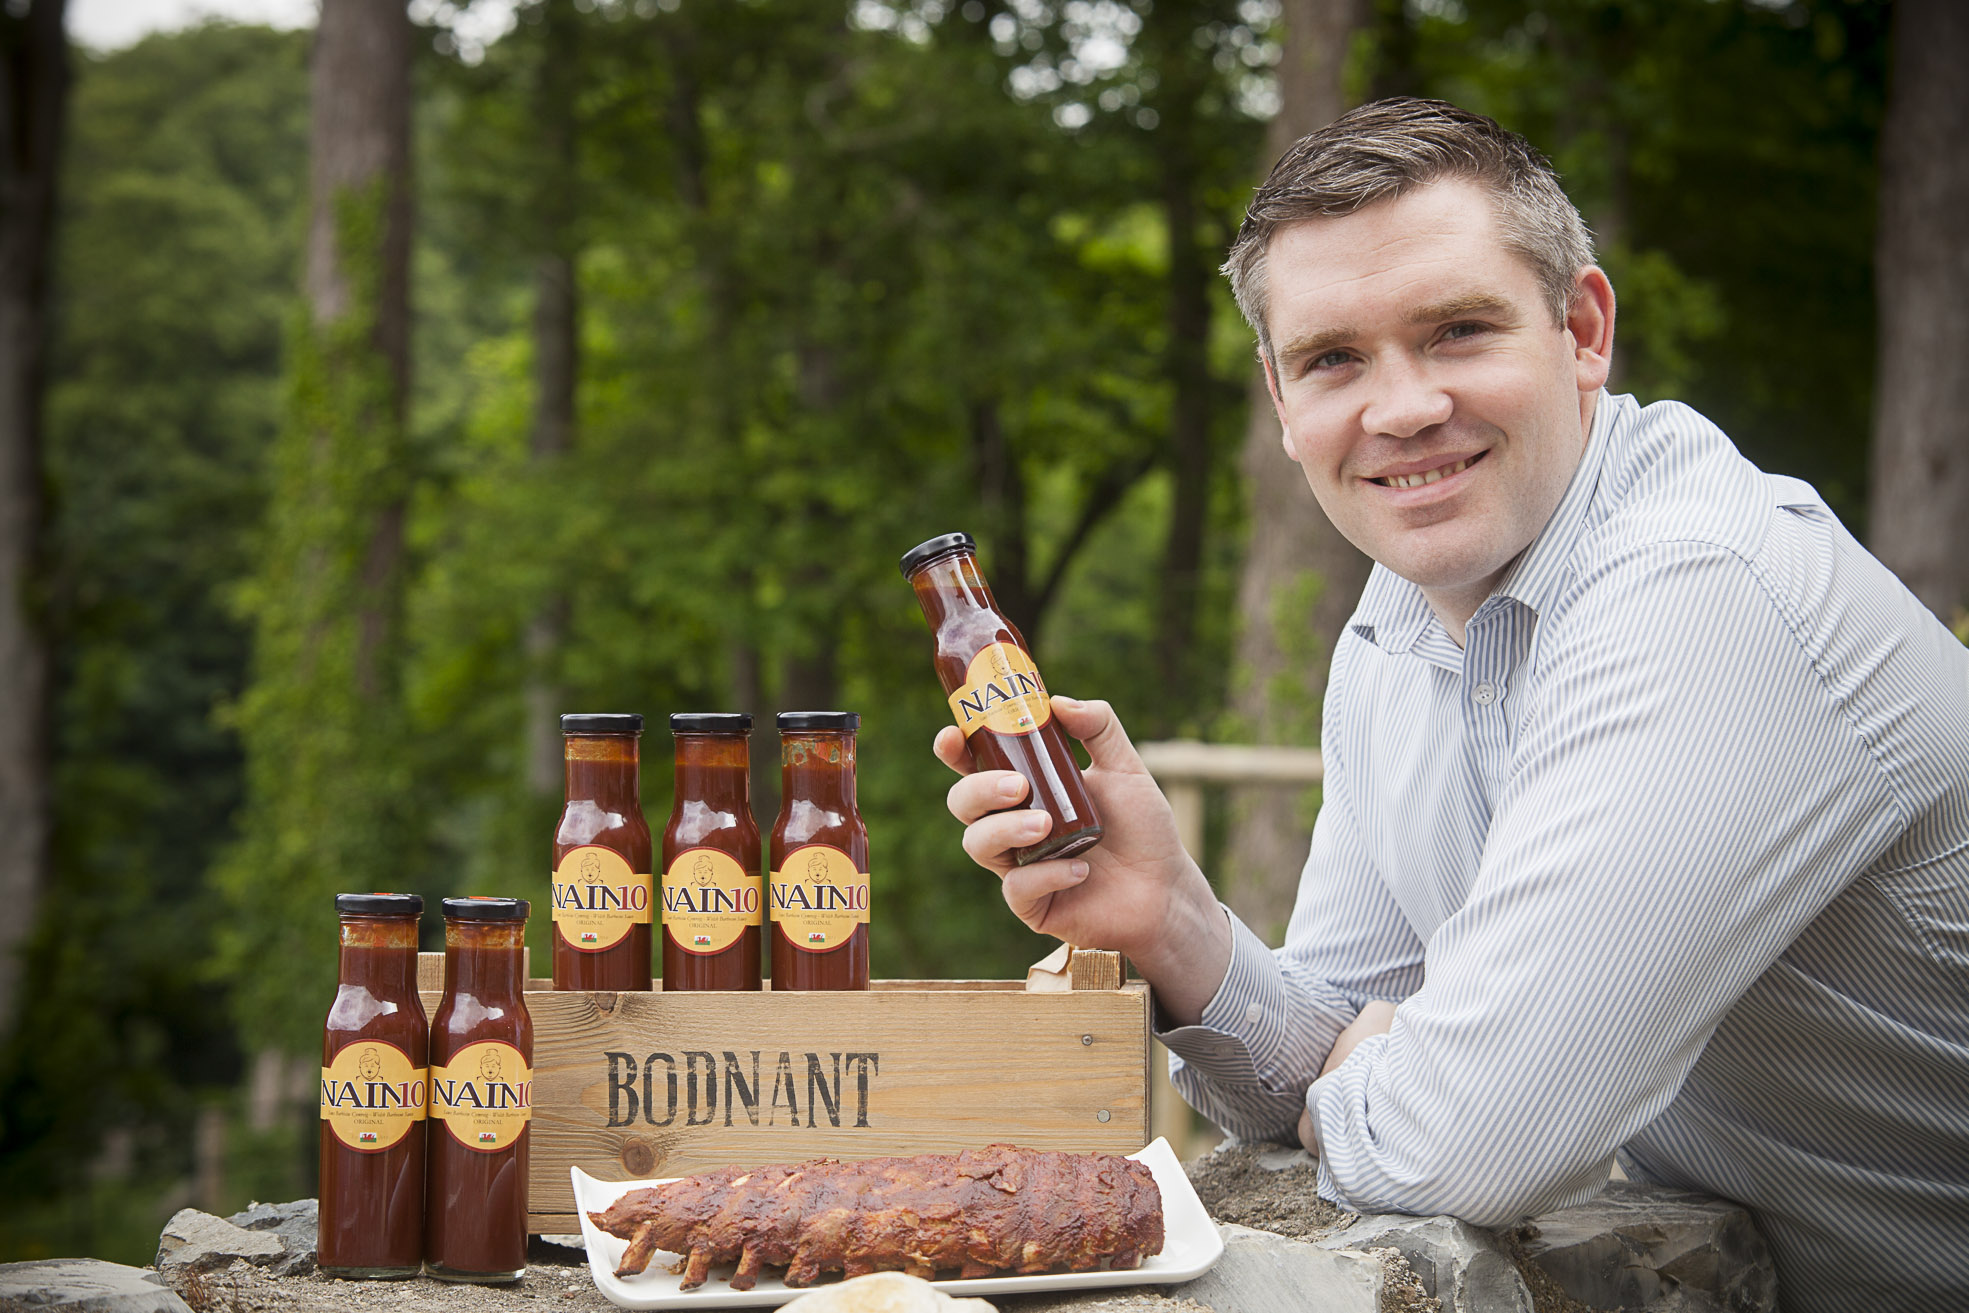 Osian spices up his BBQ sauce business after winning backing of Bodnant Welsh Food Centre